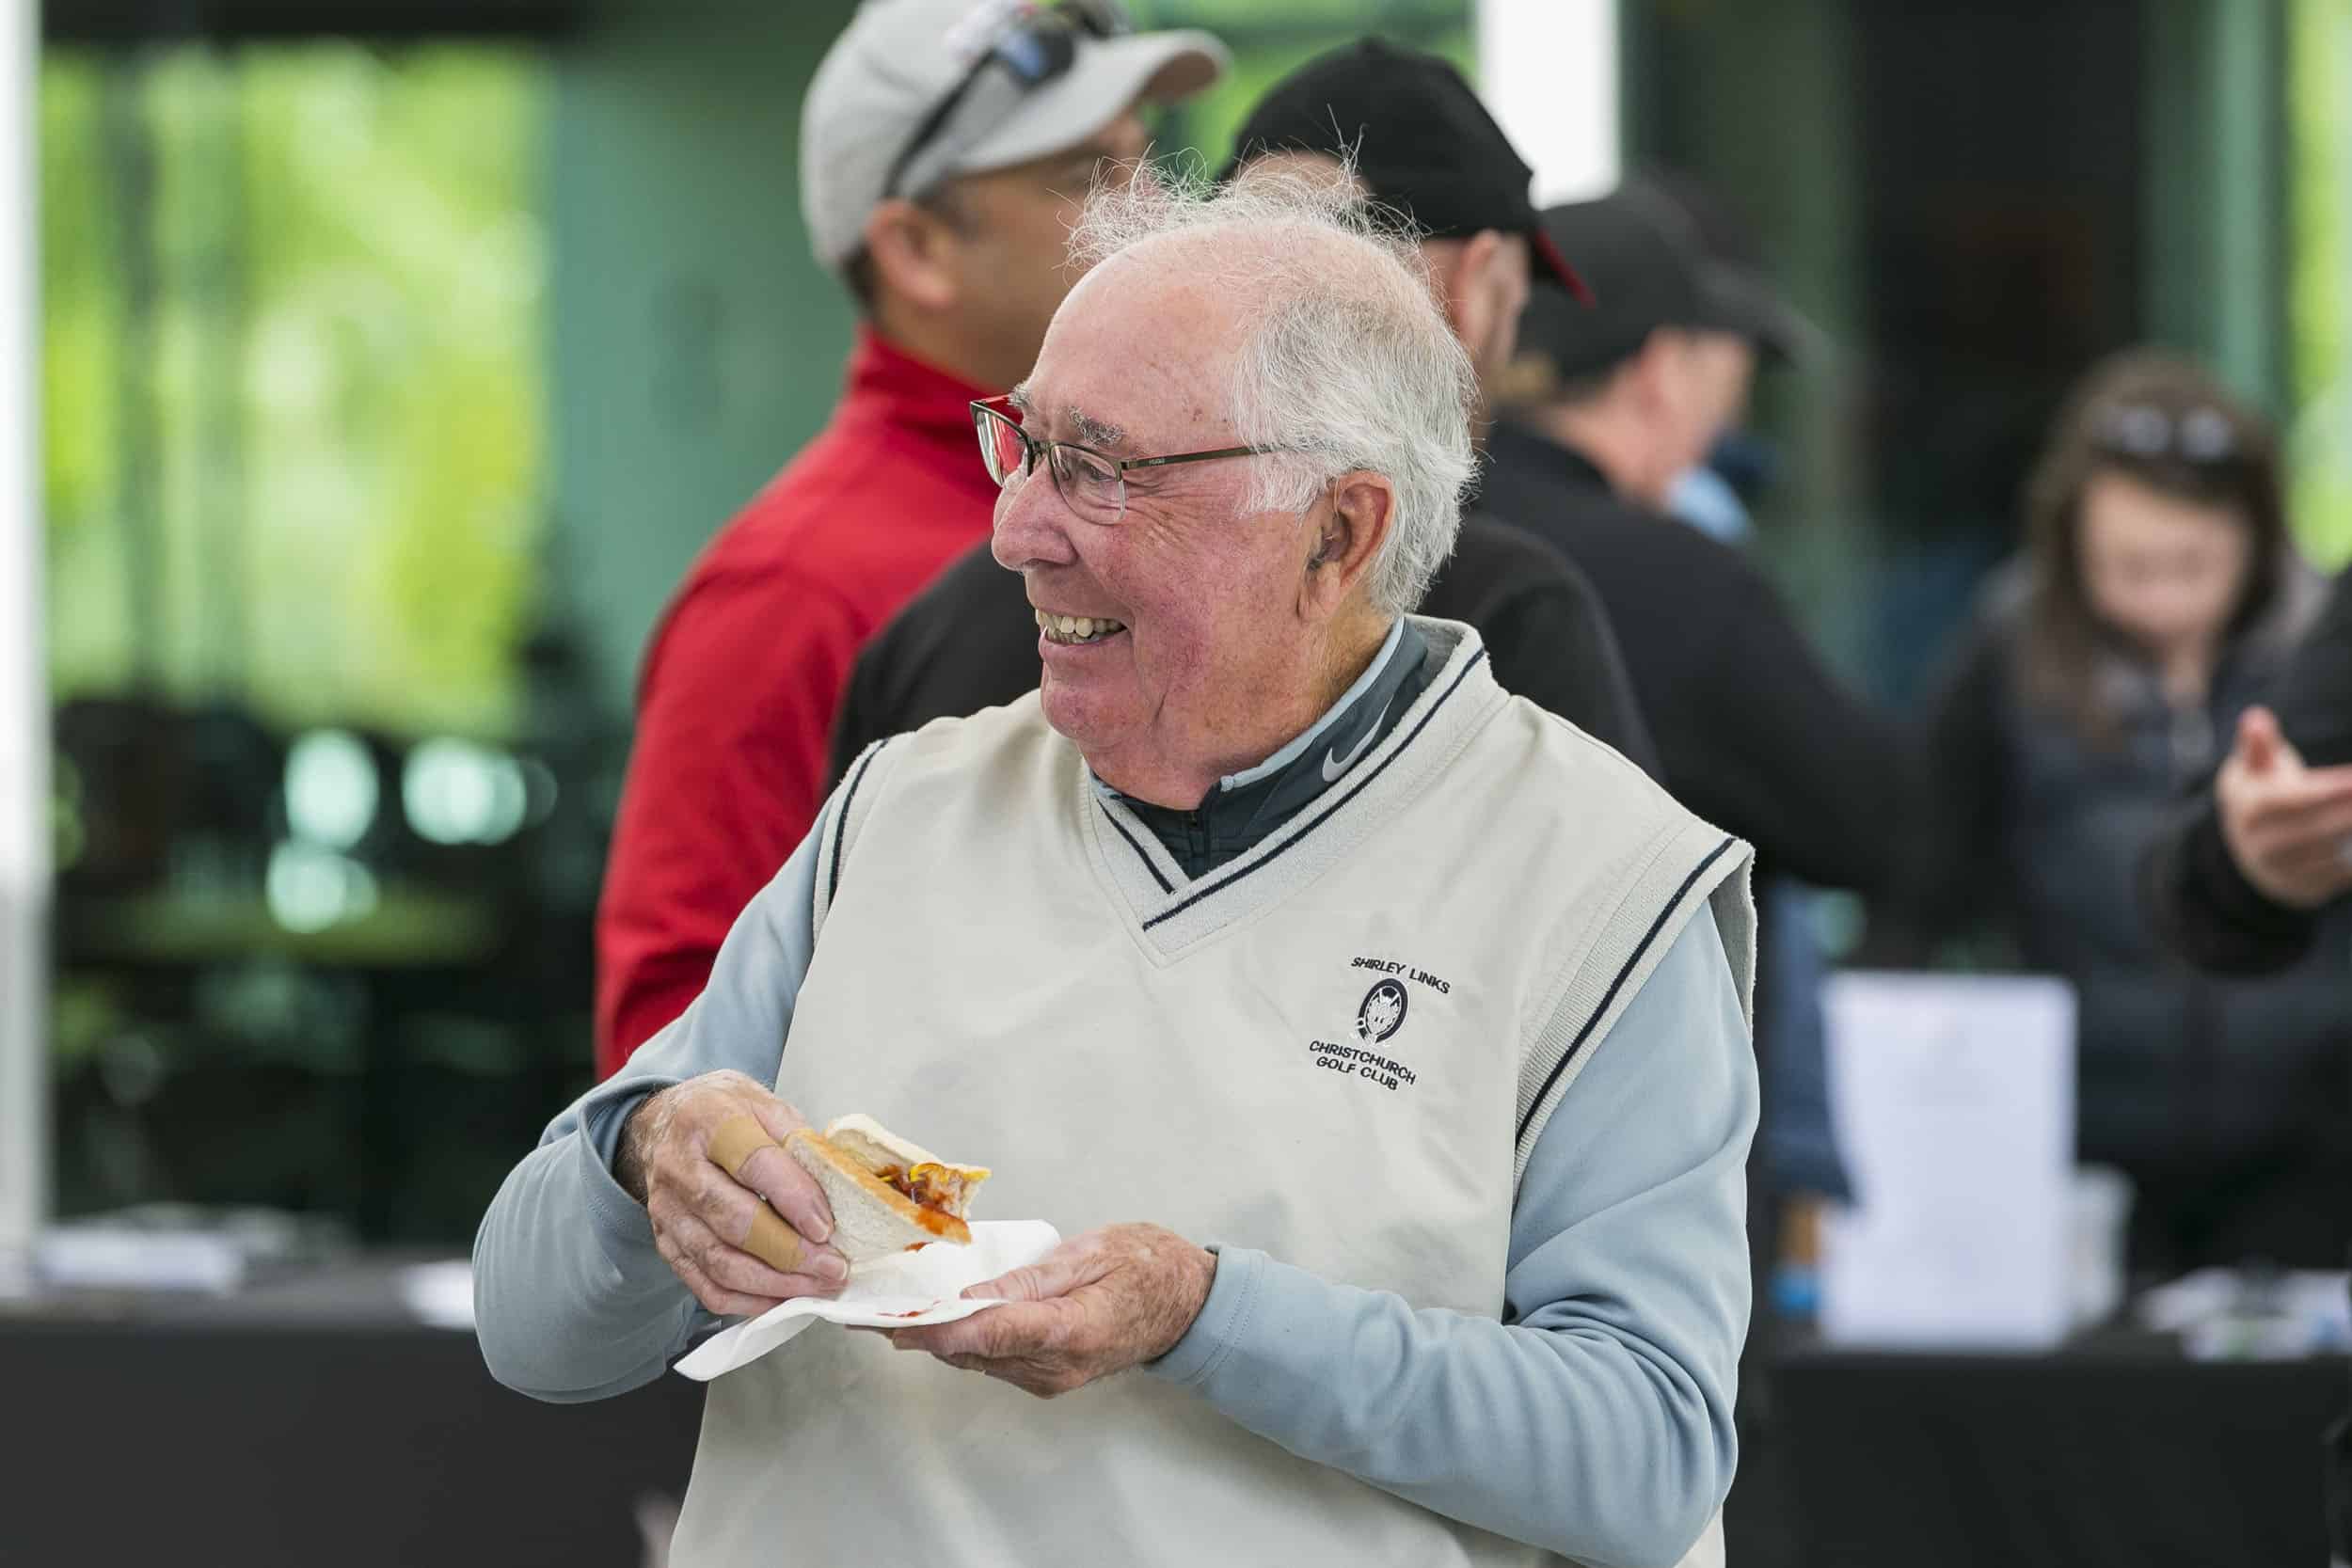 Golfer enjoying sausage in bread at charity match.